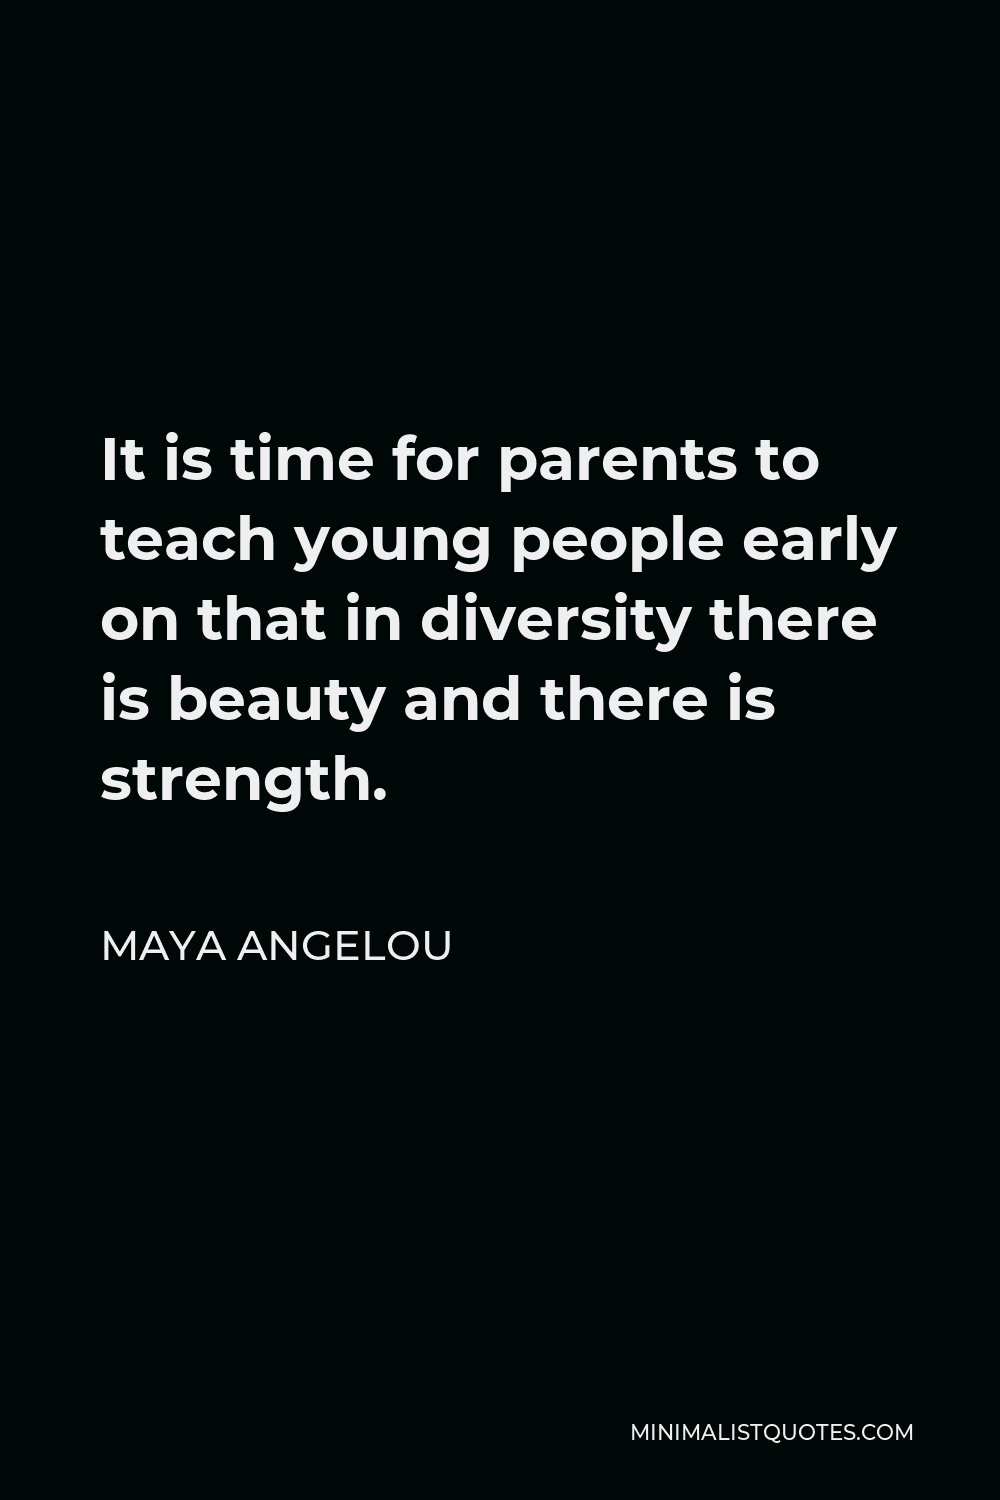 Maya Angelou Quote - It is time for parents to teach young people early on that in diversity there is beauty and there is strength.